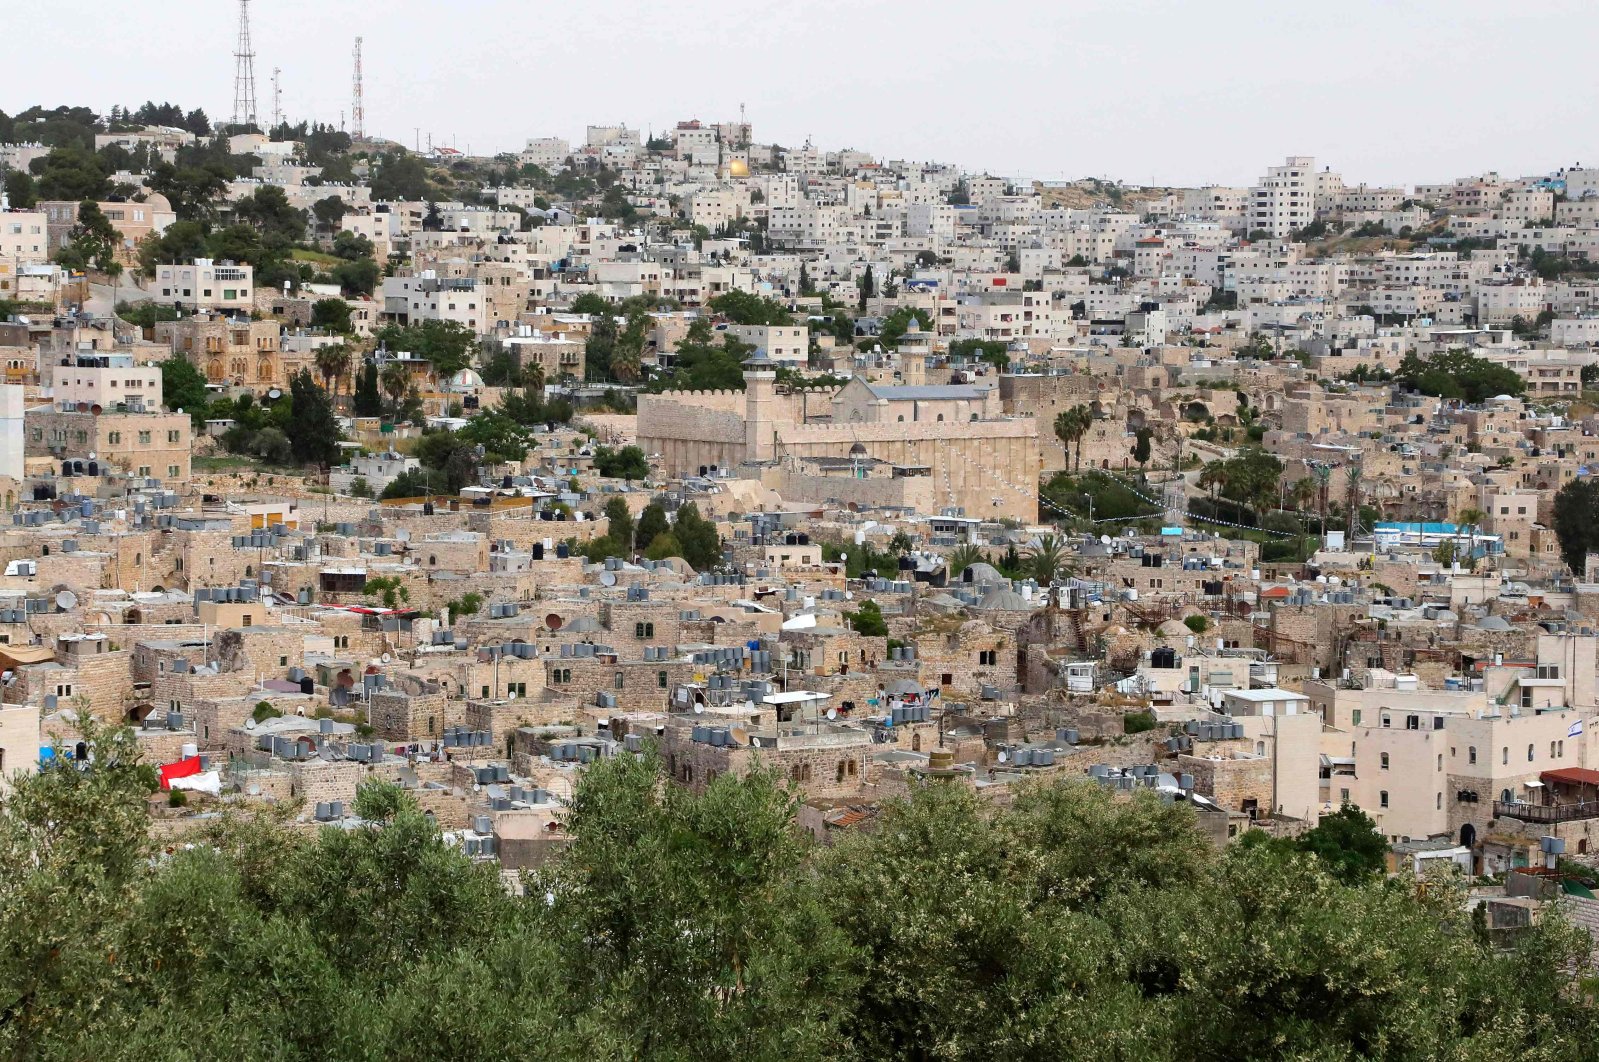 A general view of the Old City of Hebron with the Ibrahimi mosque, or the Tomb of the Patriarchs, closed down during the coronavirus pandemic crisis, occupied West Bank, on May 15, 2020. (AFP Photo)